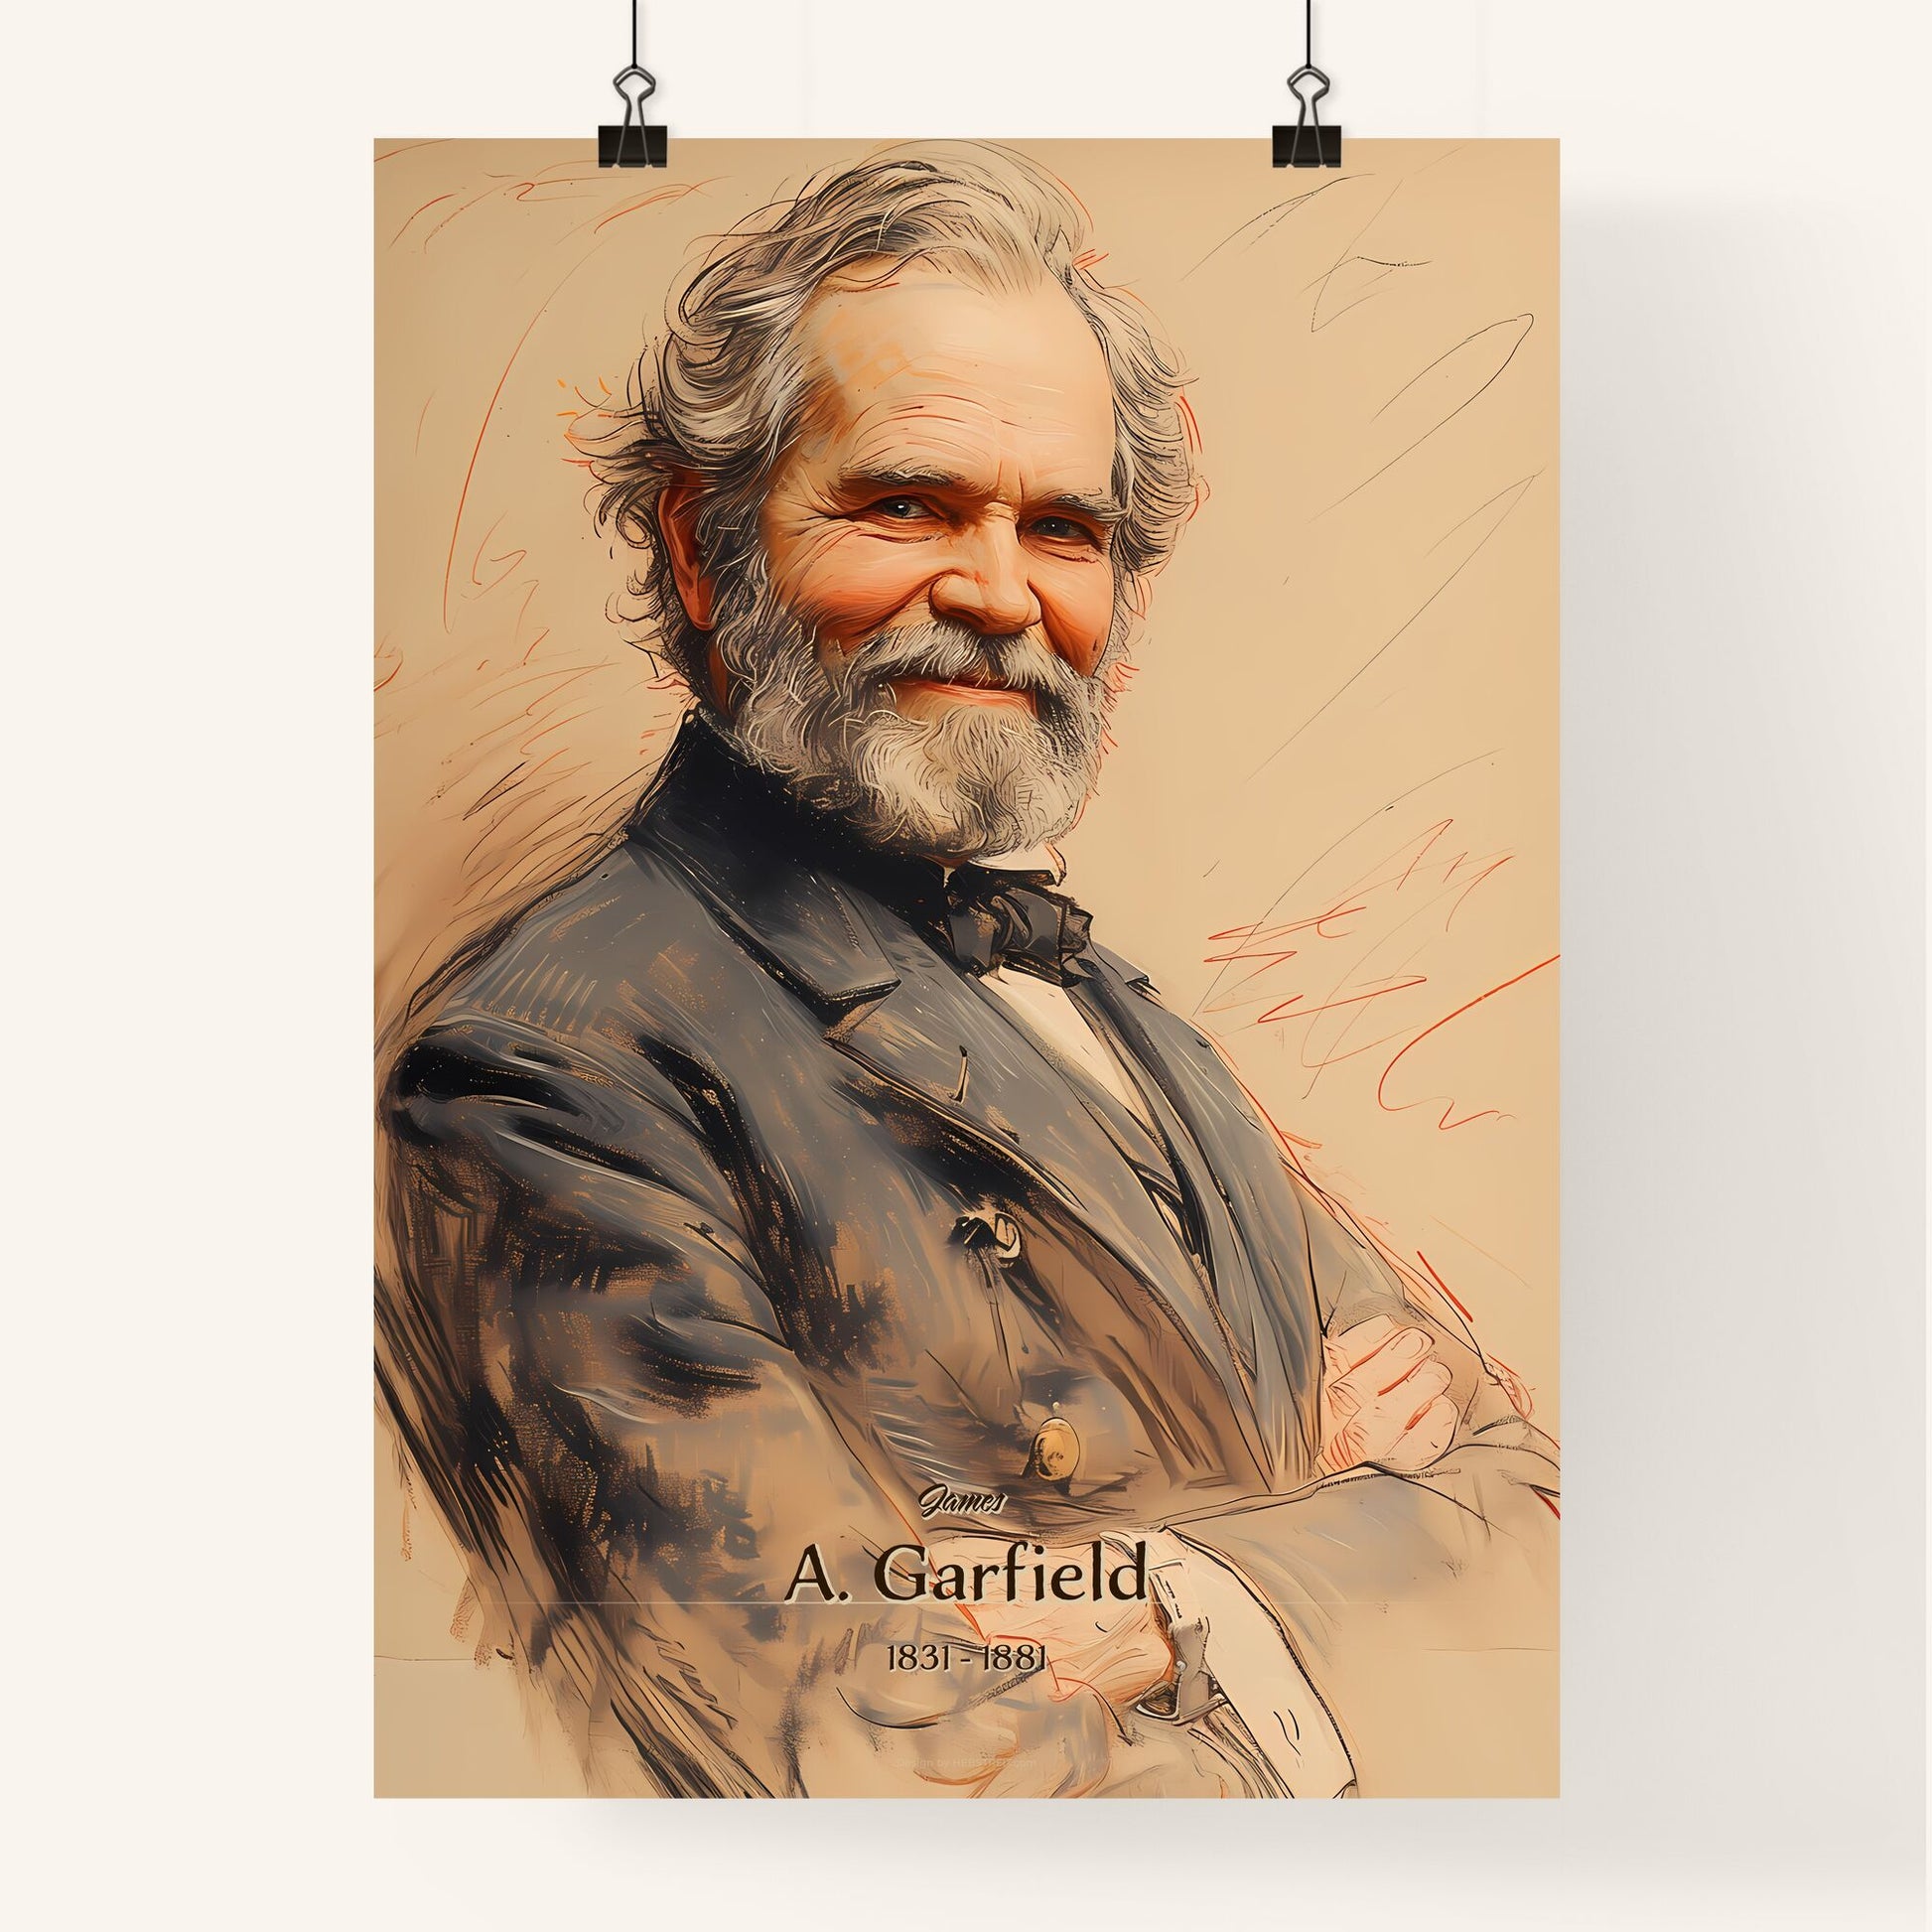 James, A. Garfield, 1831 - 1881, A Poster of a man with a beard and mustache wearing a suit Default Title